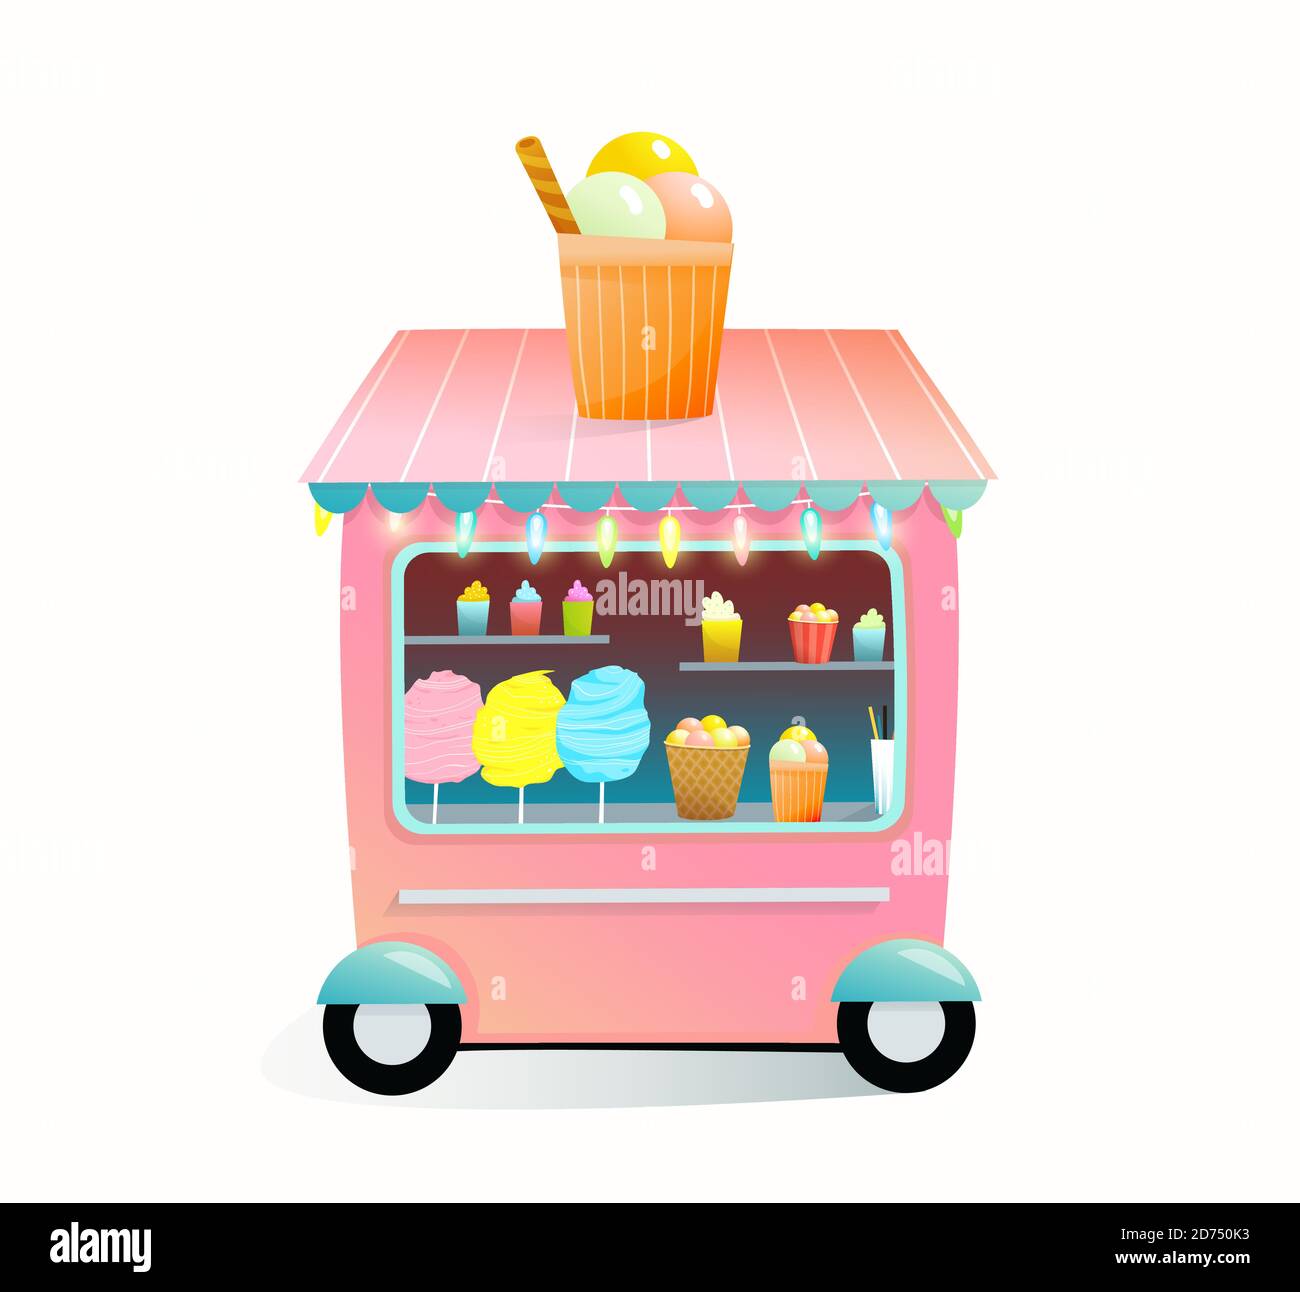 Street market vendor kiosk with cotton candy, ice cream, and desserts. Street fair or carnival vendor from the truck, selling sweets for children. Stock Vector